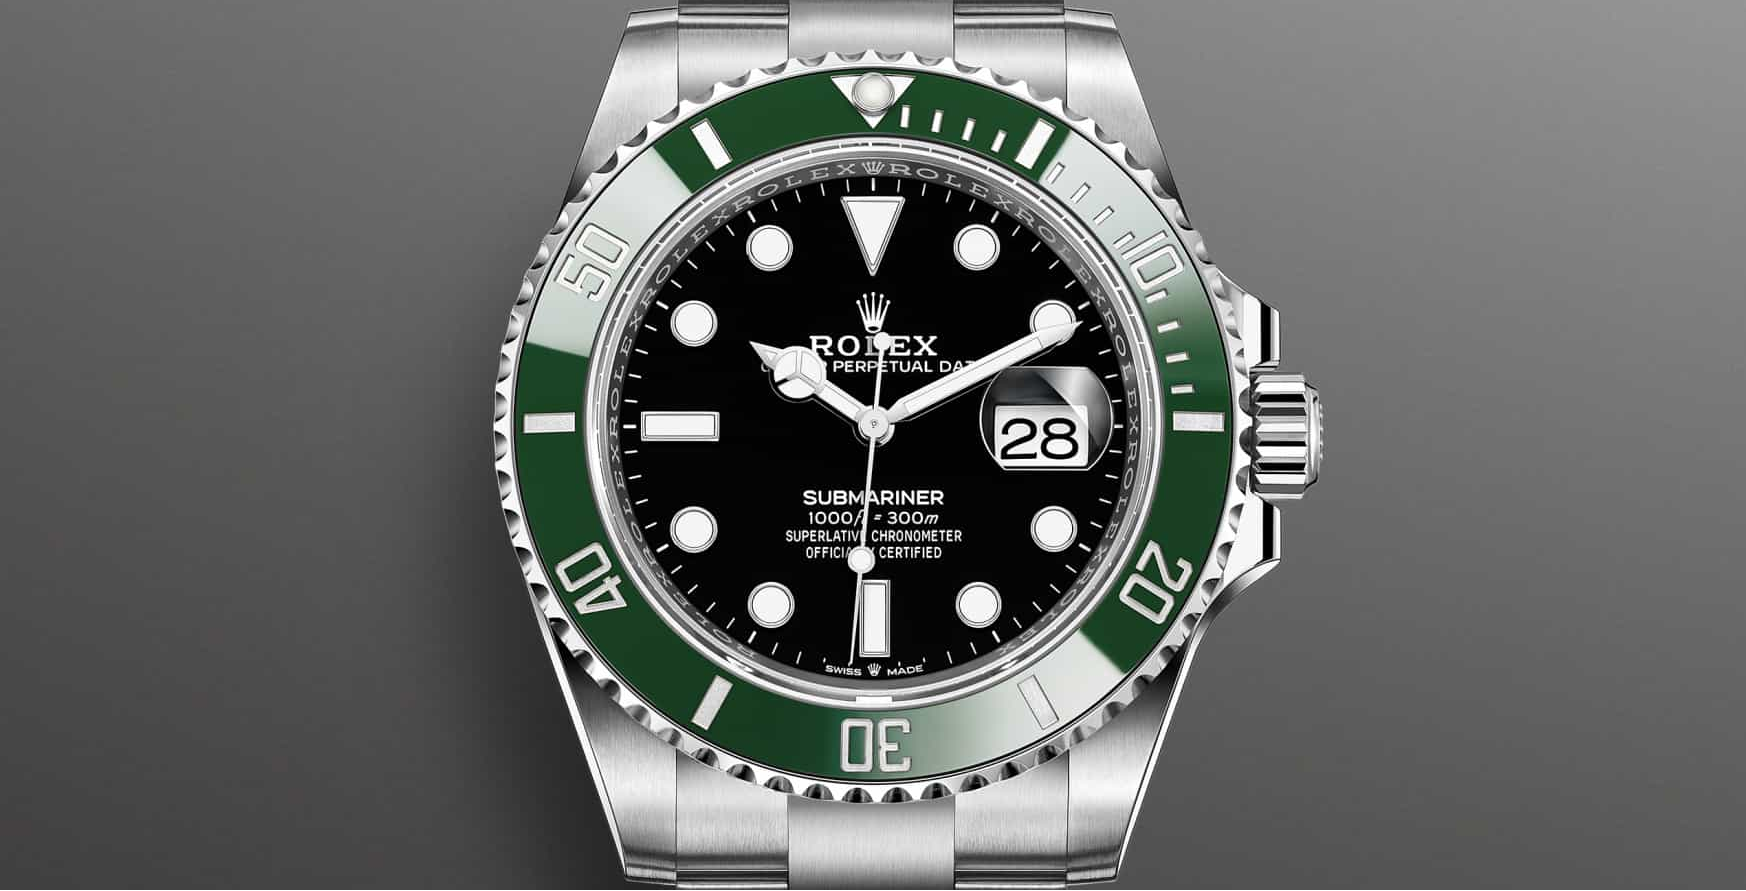 Introducing The Rolex Submariner 41mm Watch Collection For 2020 –  WristReview.com – Featuring Watch Reviews, Critiques, Reports & News